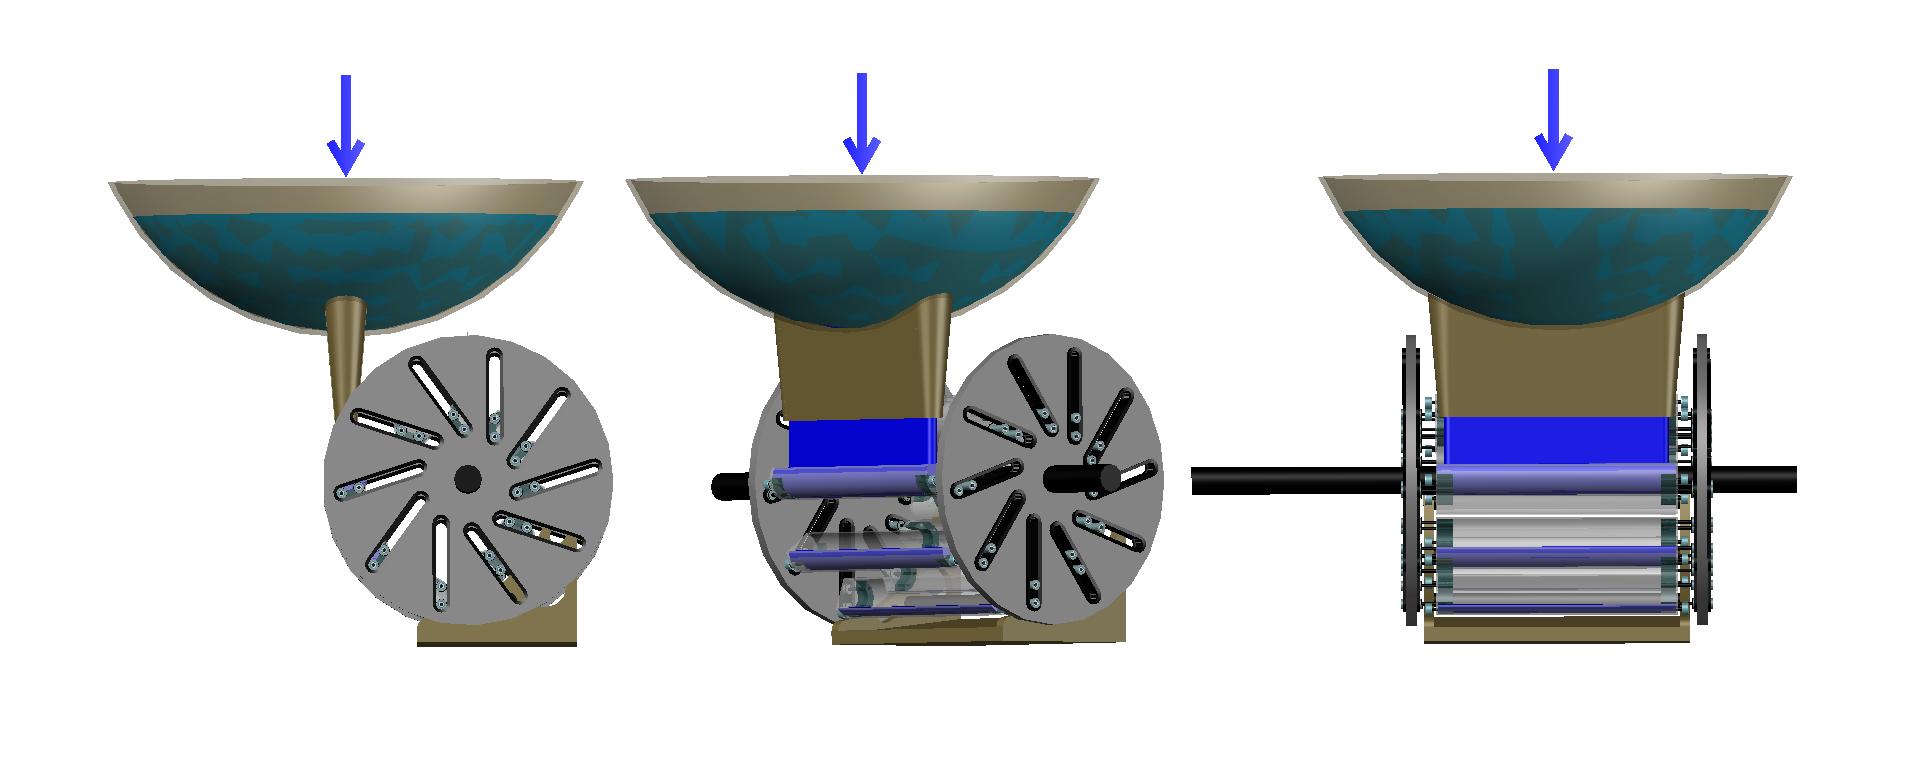 The appearance of embodiment of the turbine rotor equipped by hollow movable blades, that is shown in three foreshortenings.